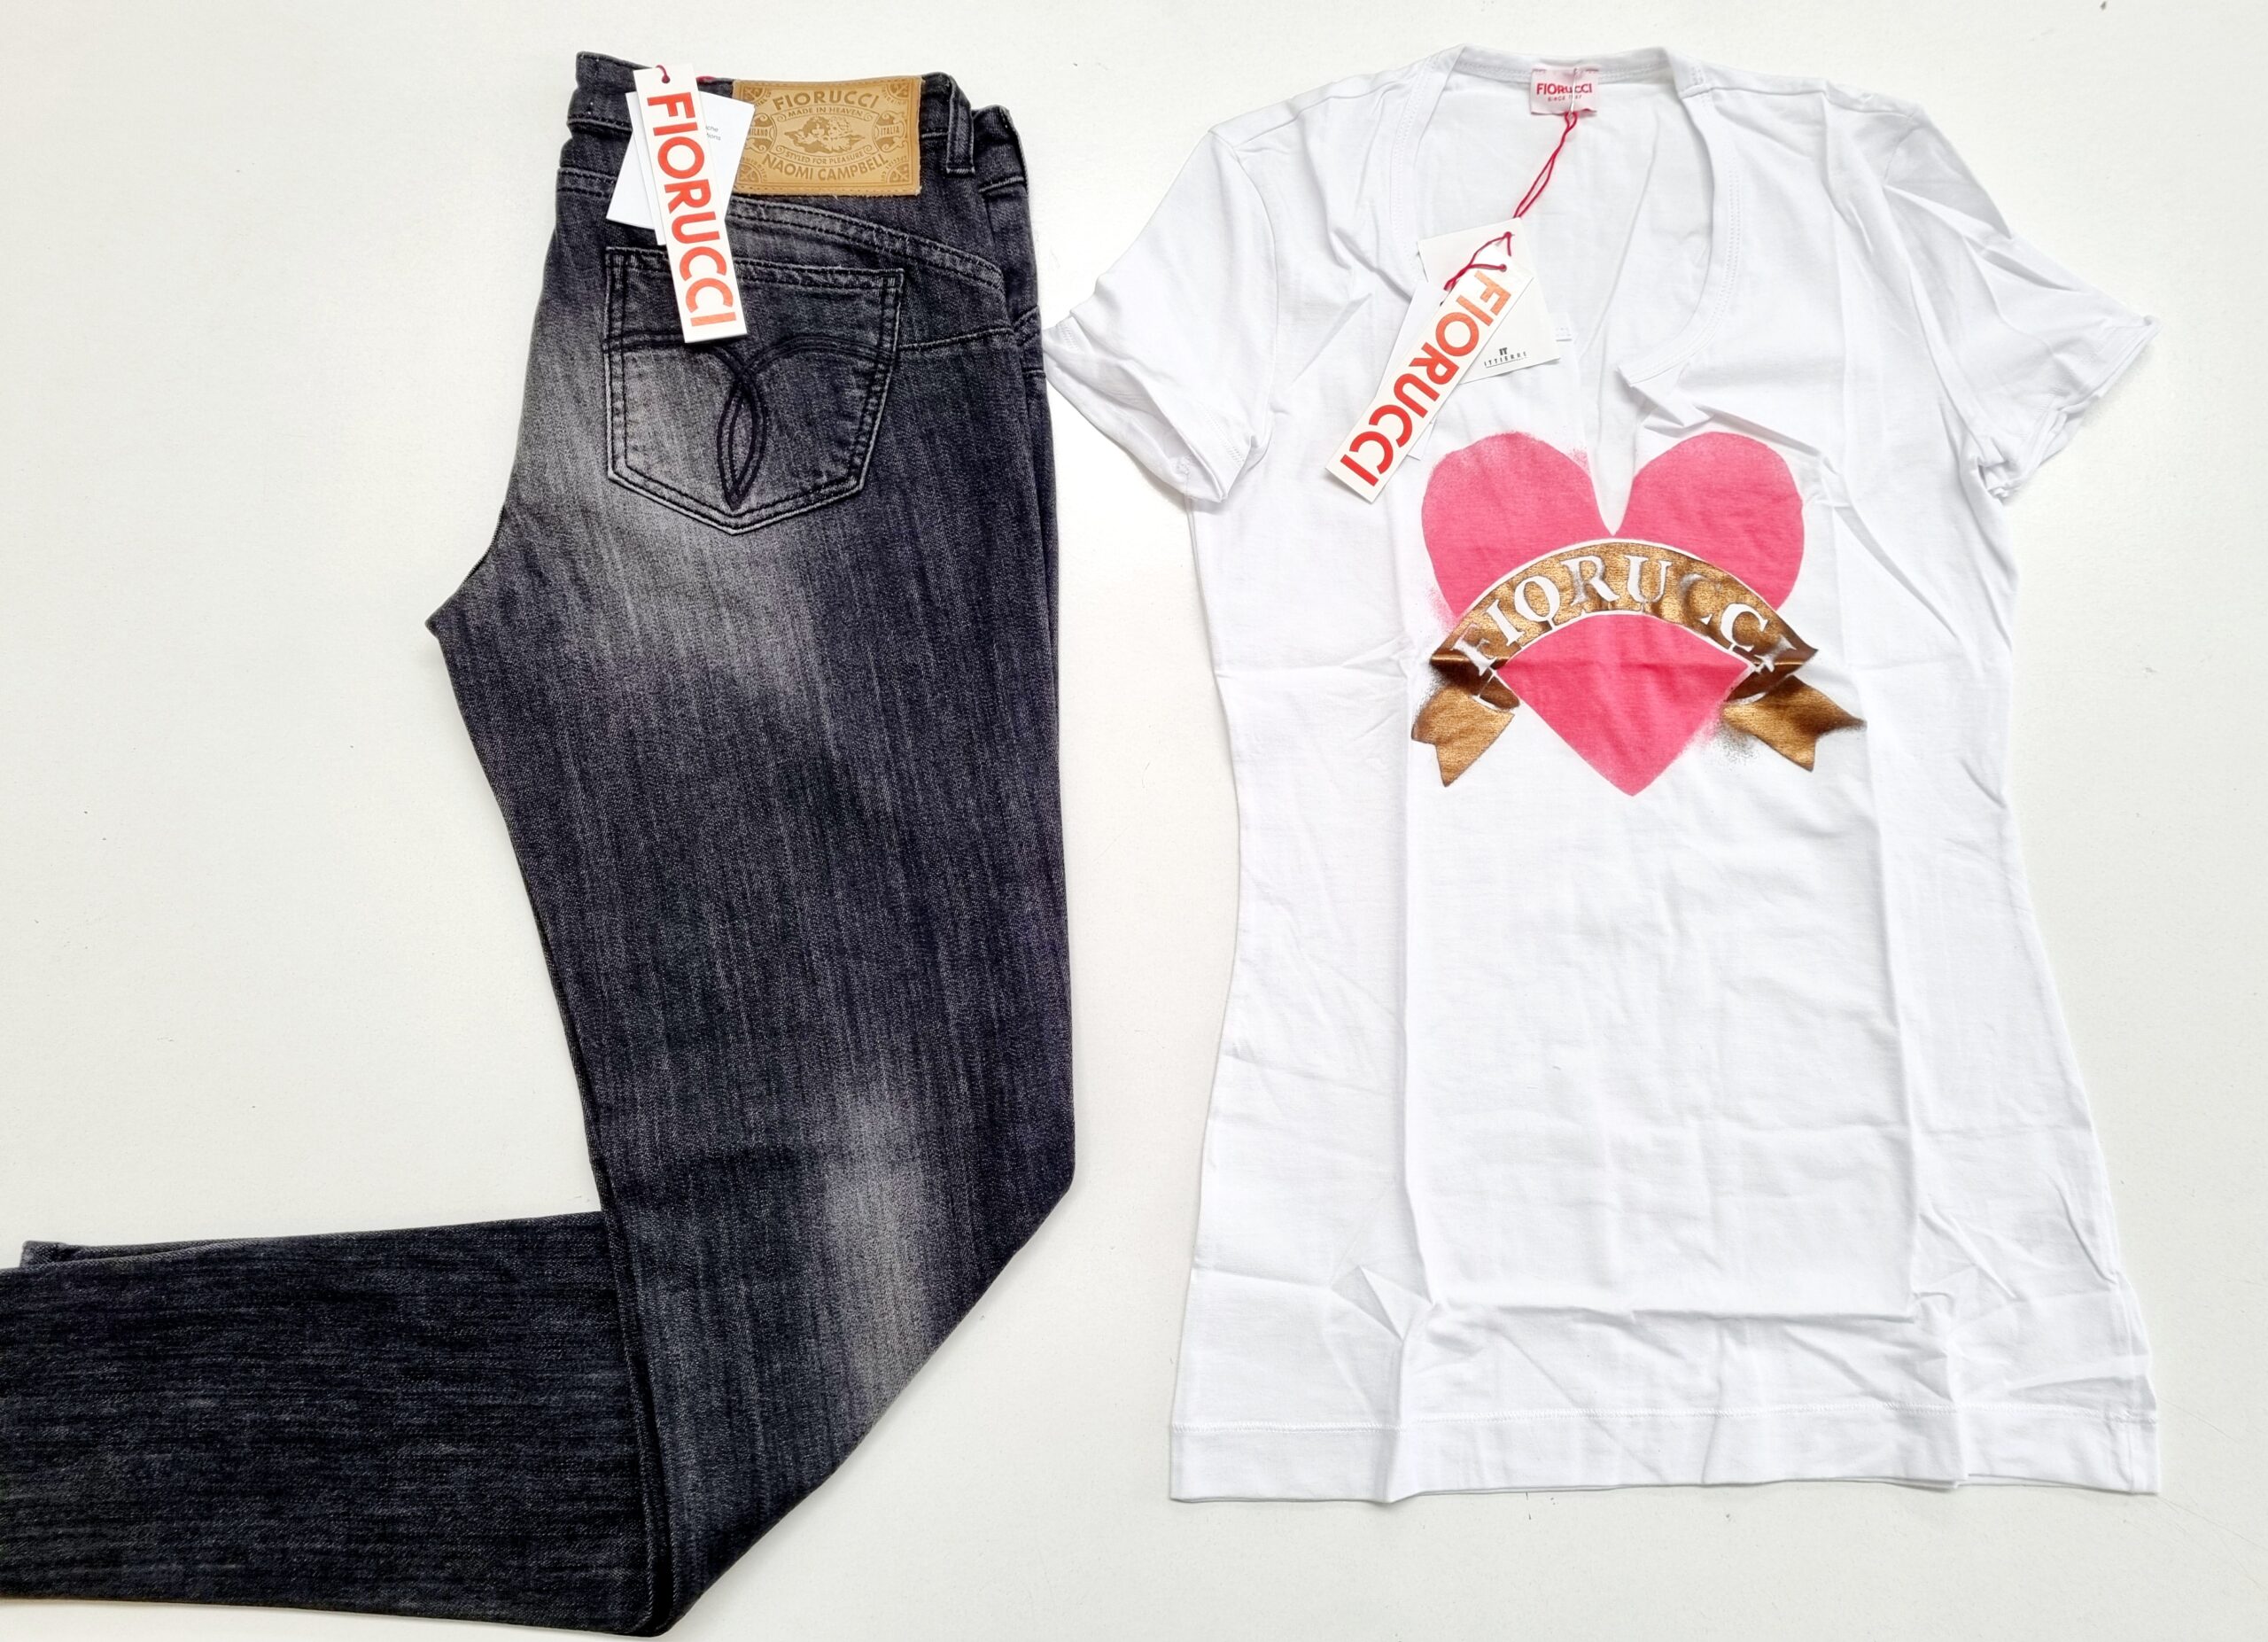 FIORUCCI - Wholesale branded outlet clothing stocks